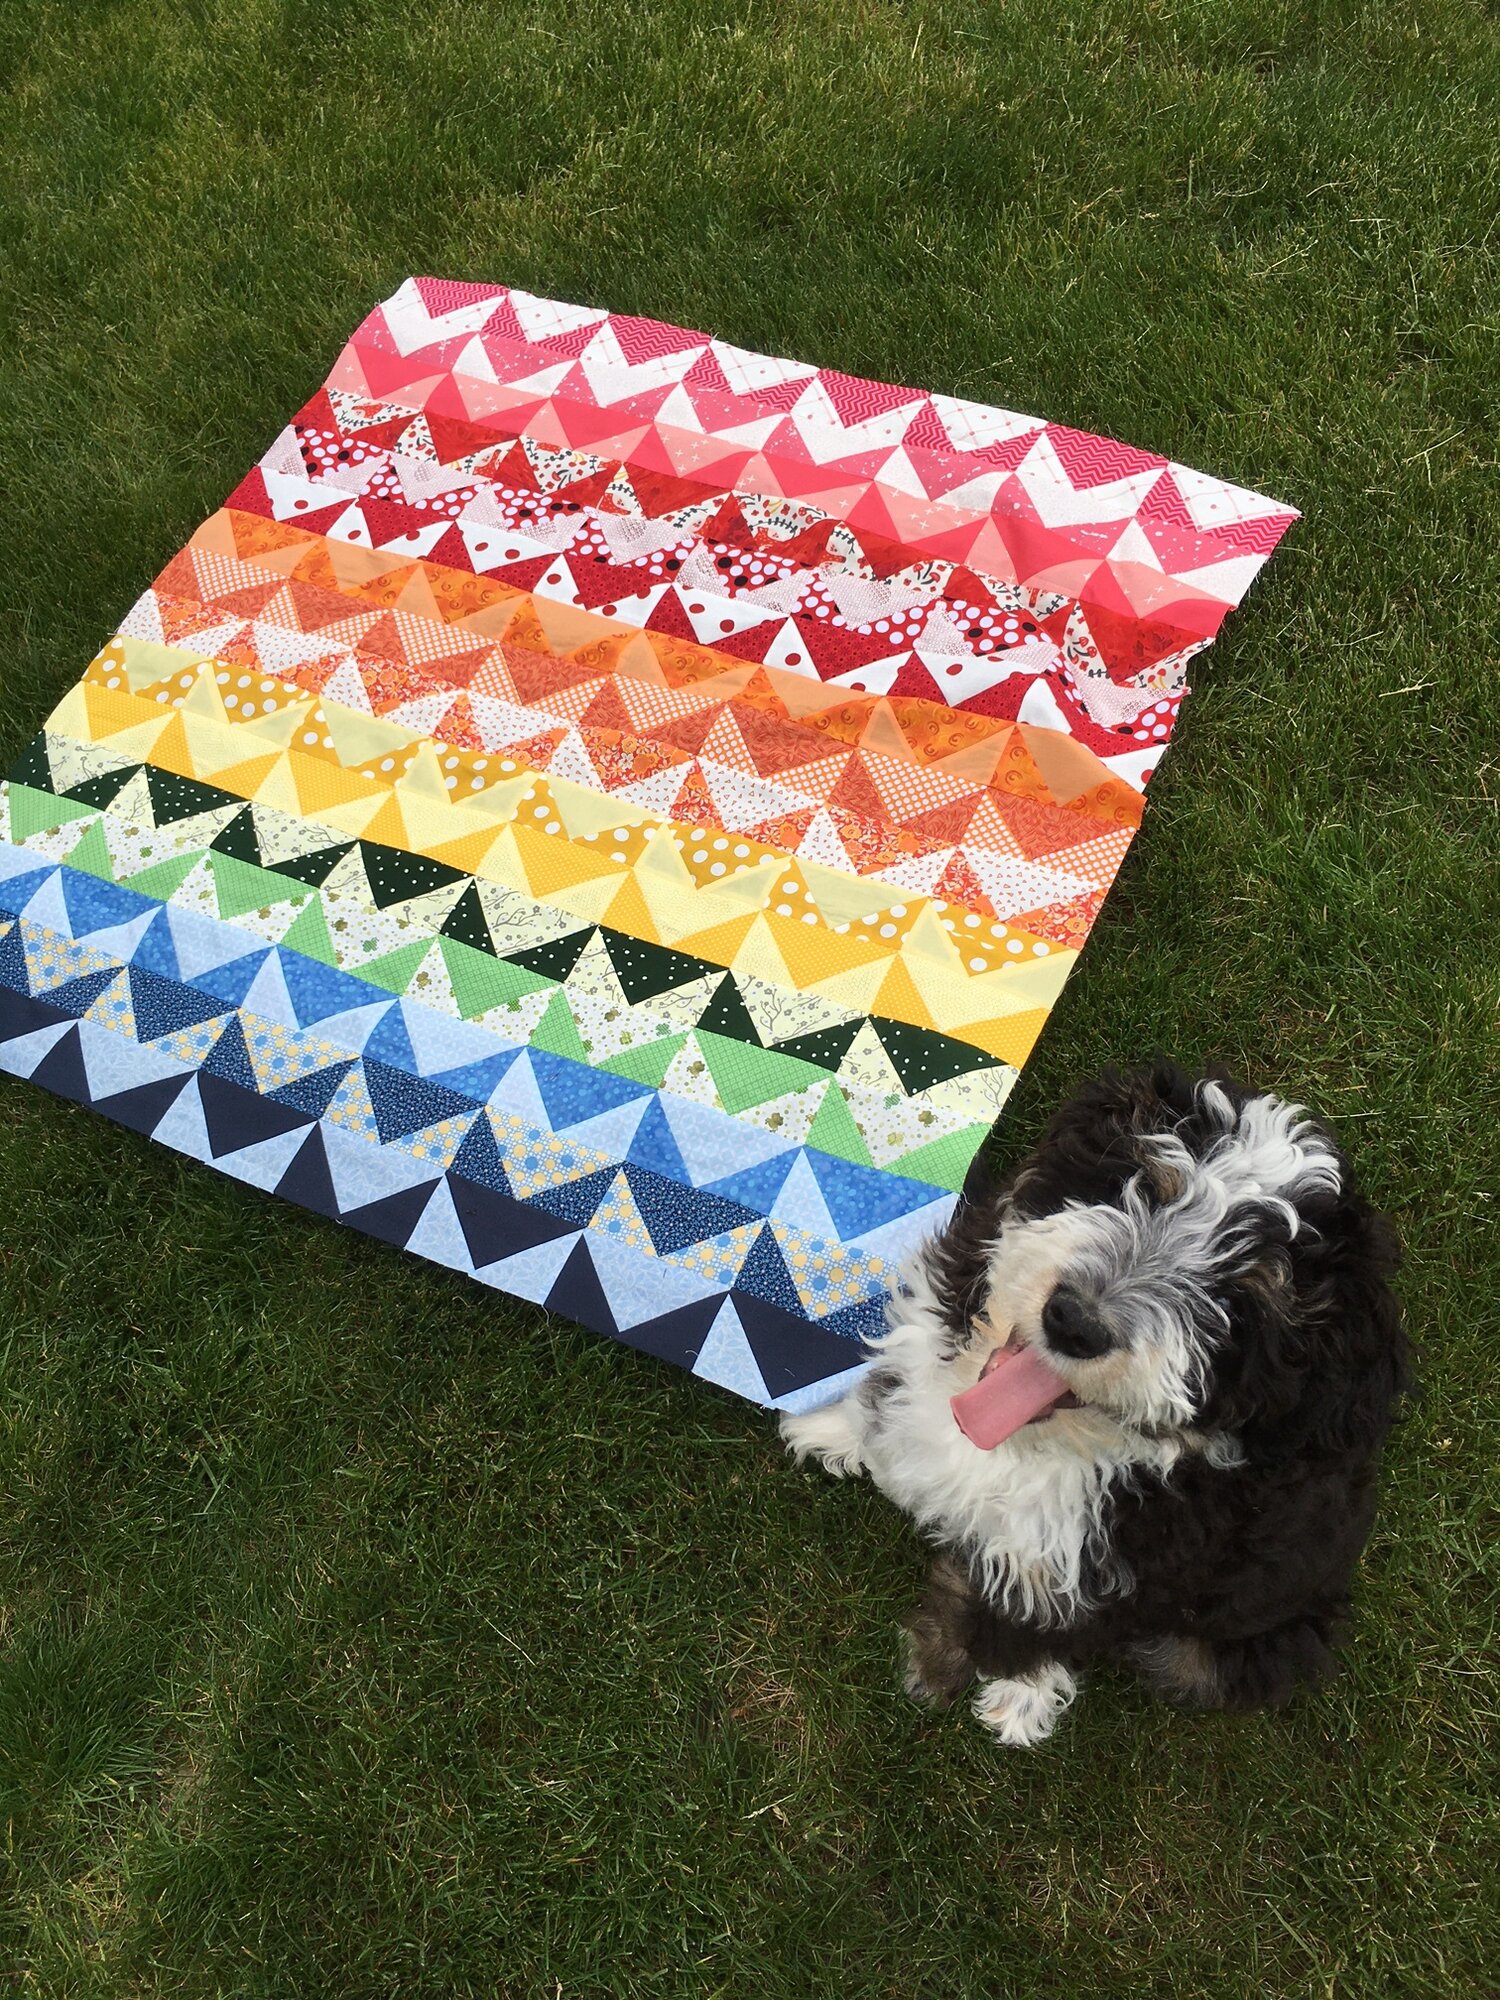 Alaina sewed up this gorgeous scrappy version in rainbow order and I couldn’t love it more - or her sweet pup! I feel so lucky to have had her help test my pattern! Alaina shares her beautiful work @heliotropegreen on IG.